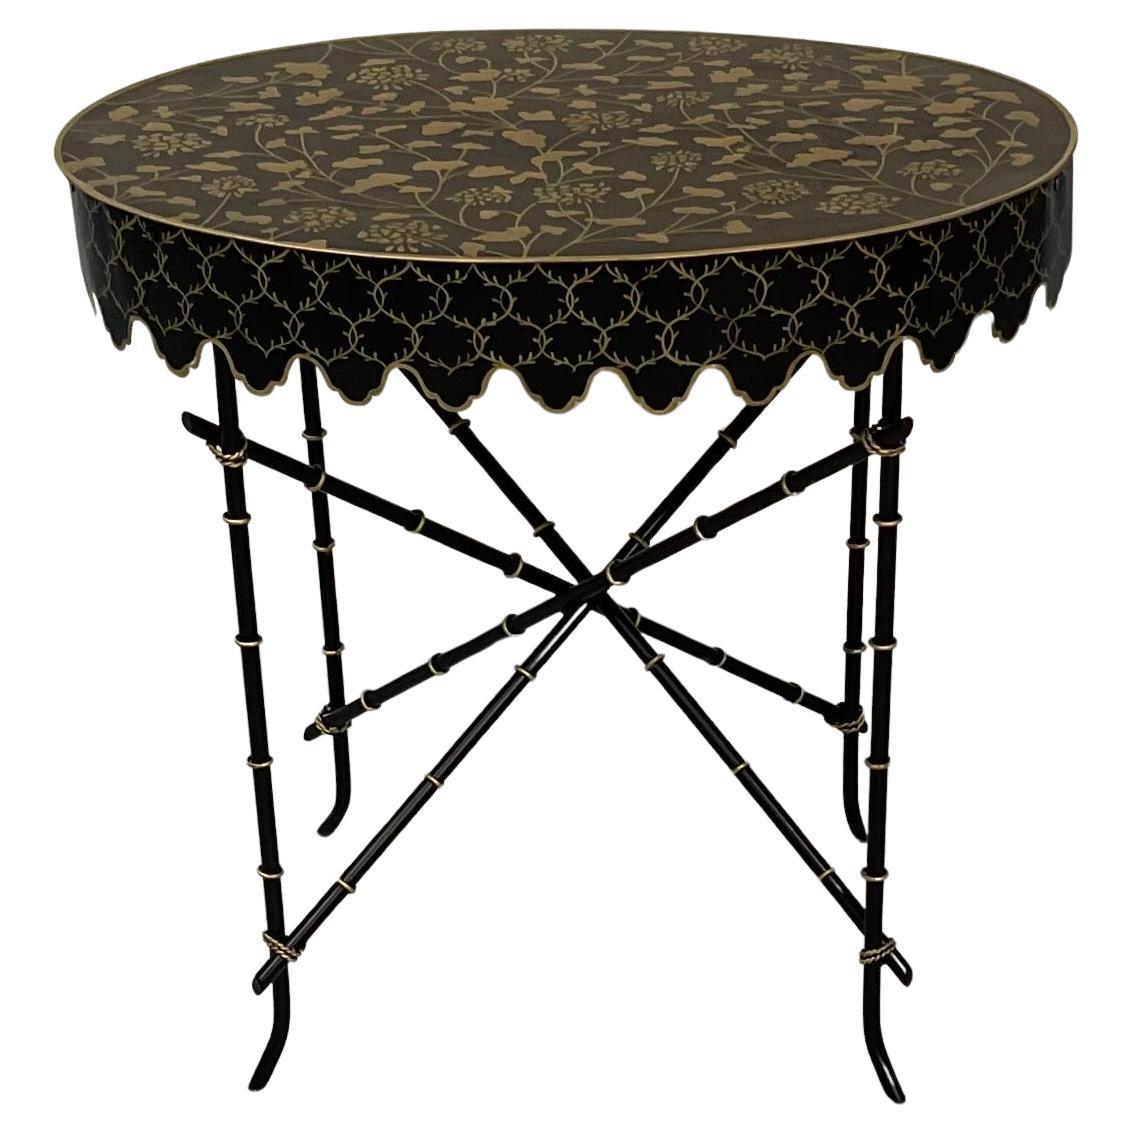 Wonderful Bamboo Oval Handpainted Tole Scalloped Side End Coffee Cocktail Tables For Sale